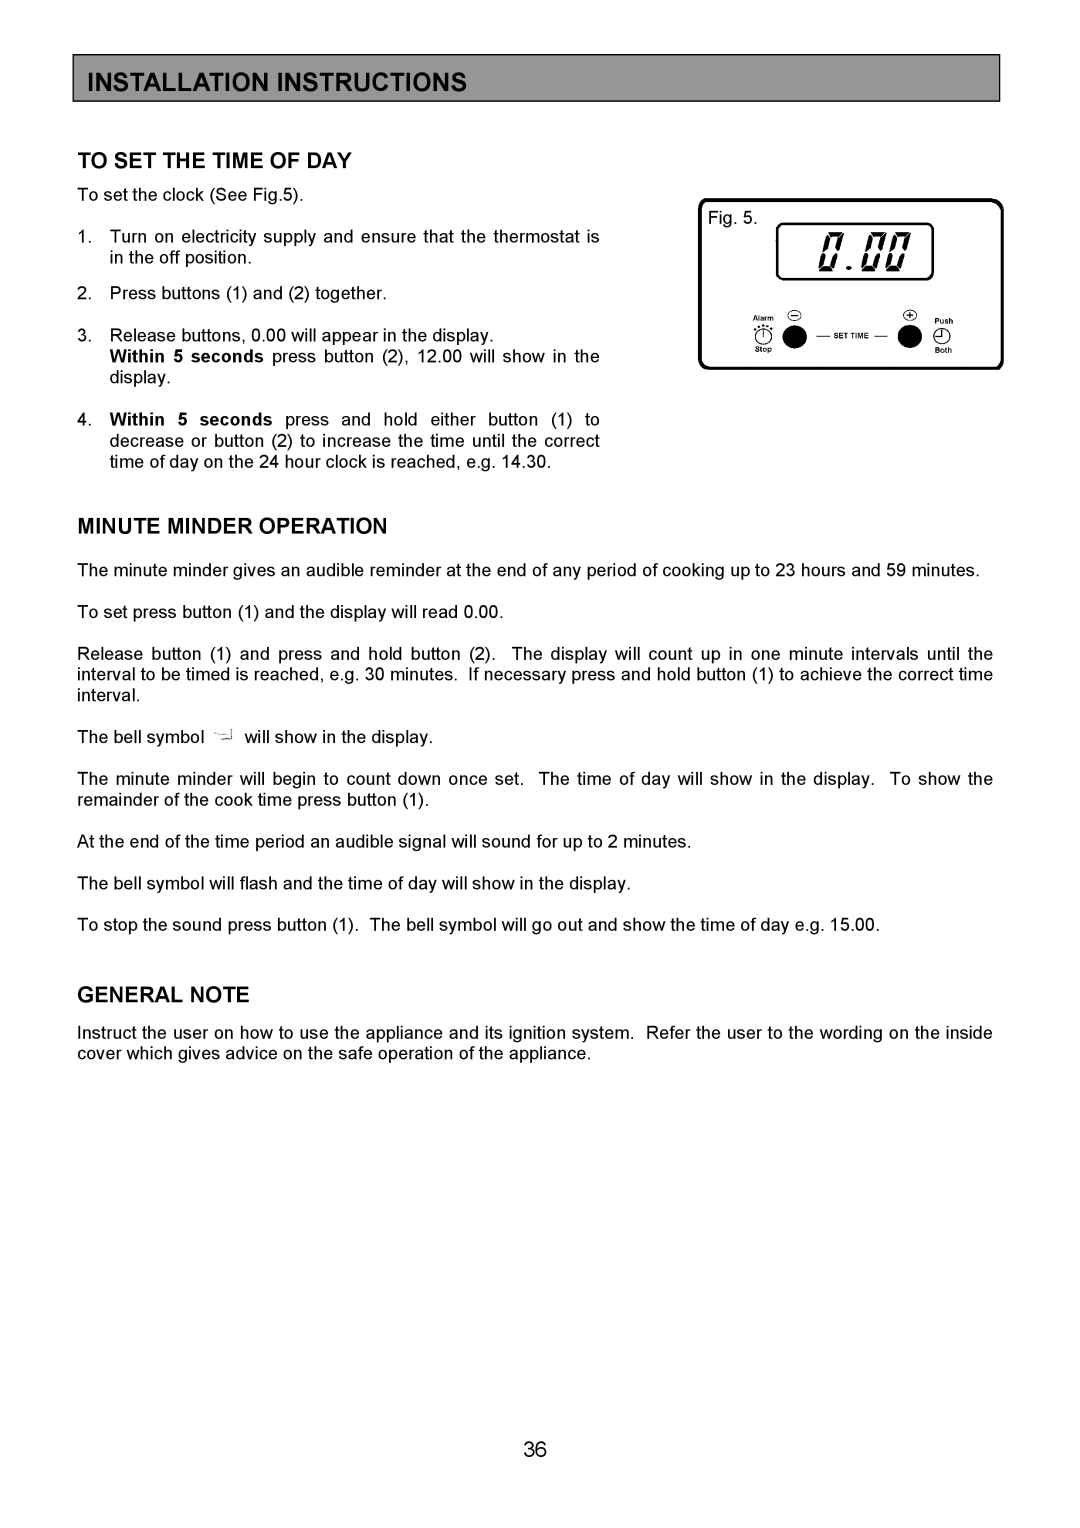 Electrolux SM 554 installation instructions Minute Minder Operation, General Note 